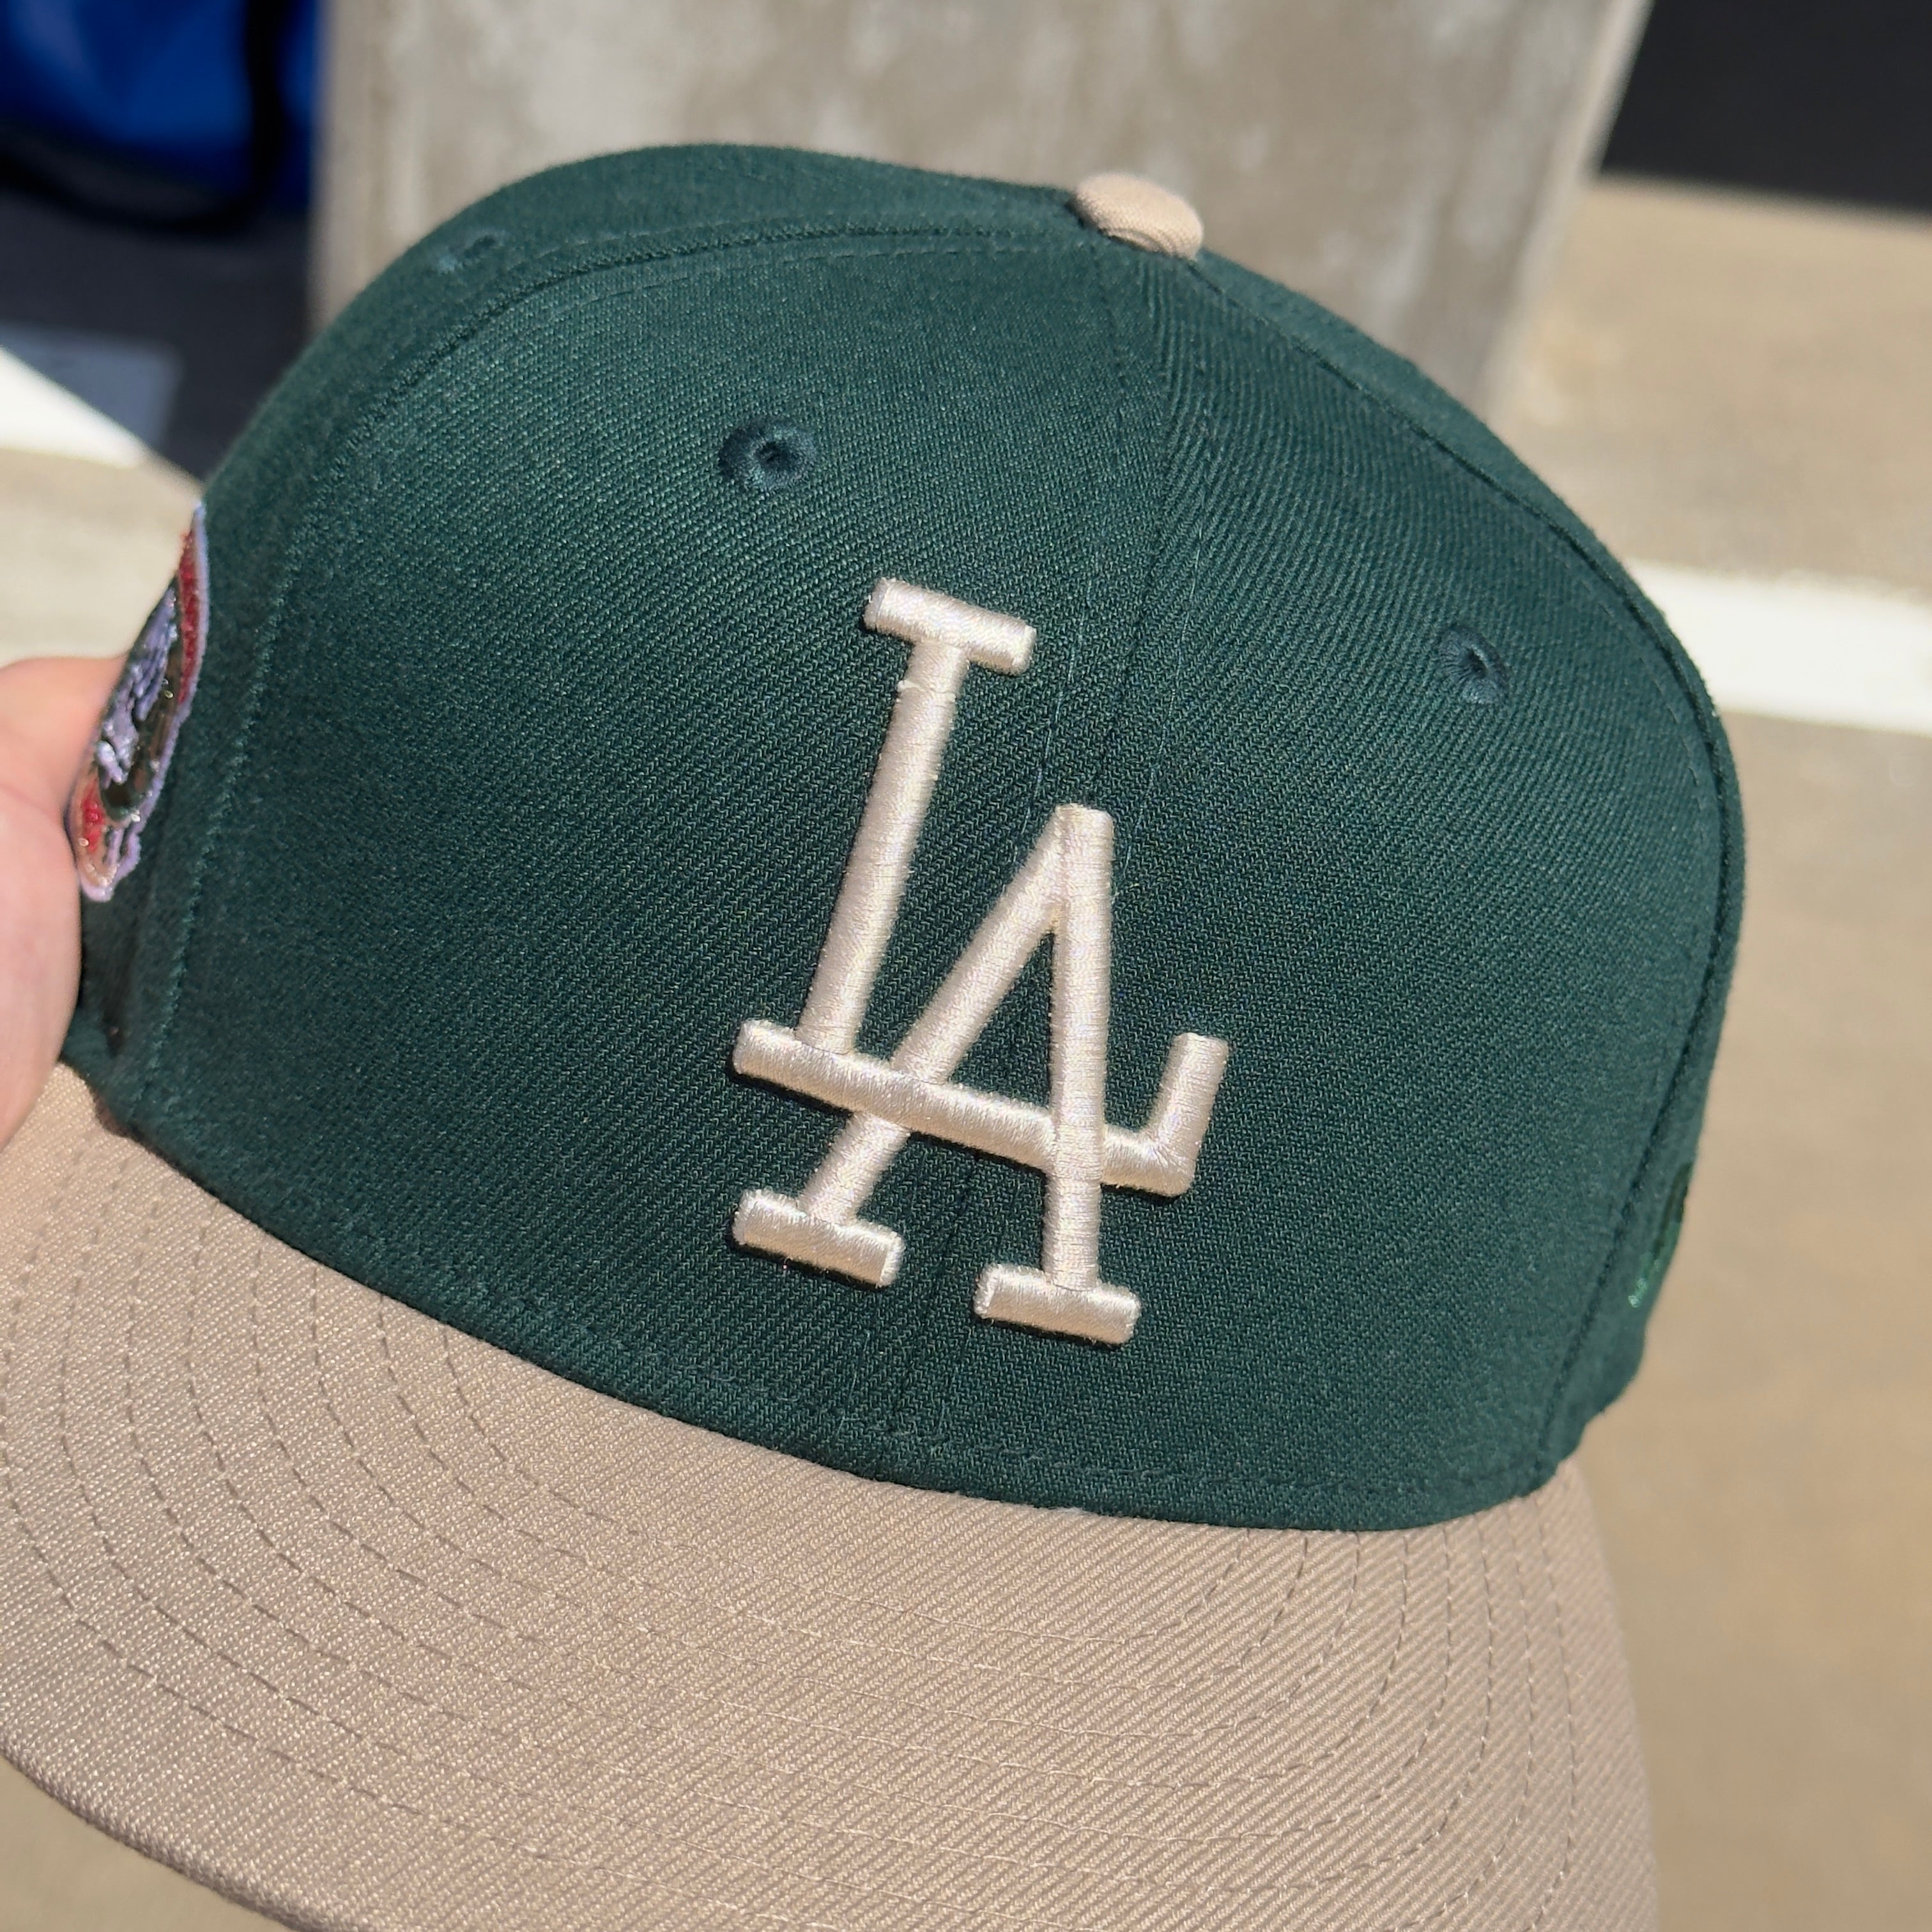 5/8 USED Green Los Angeles Dodgers 1st World Champ 59fifty New Era Fitted Hat Cap